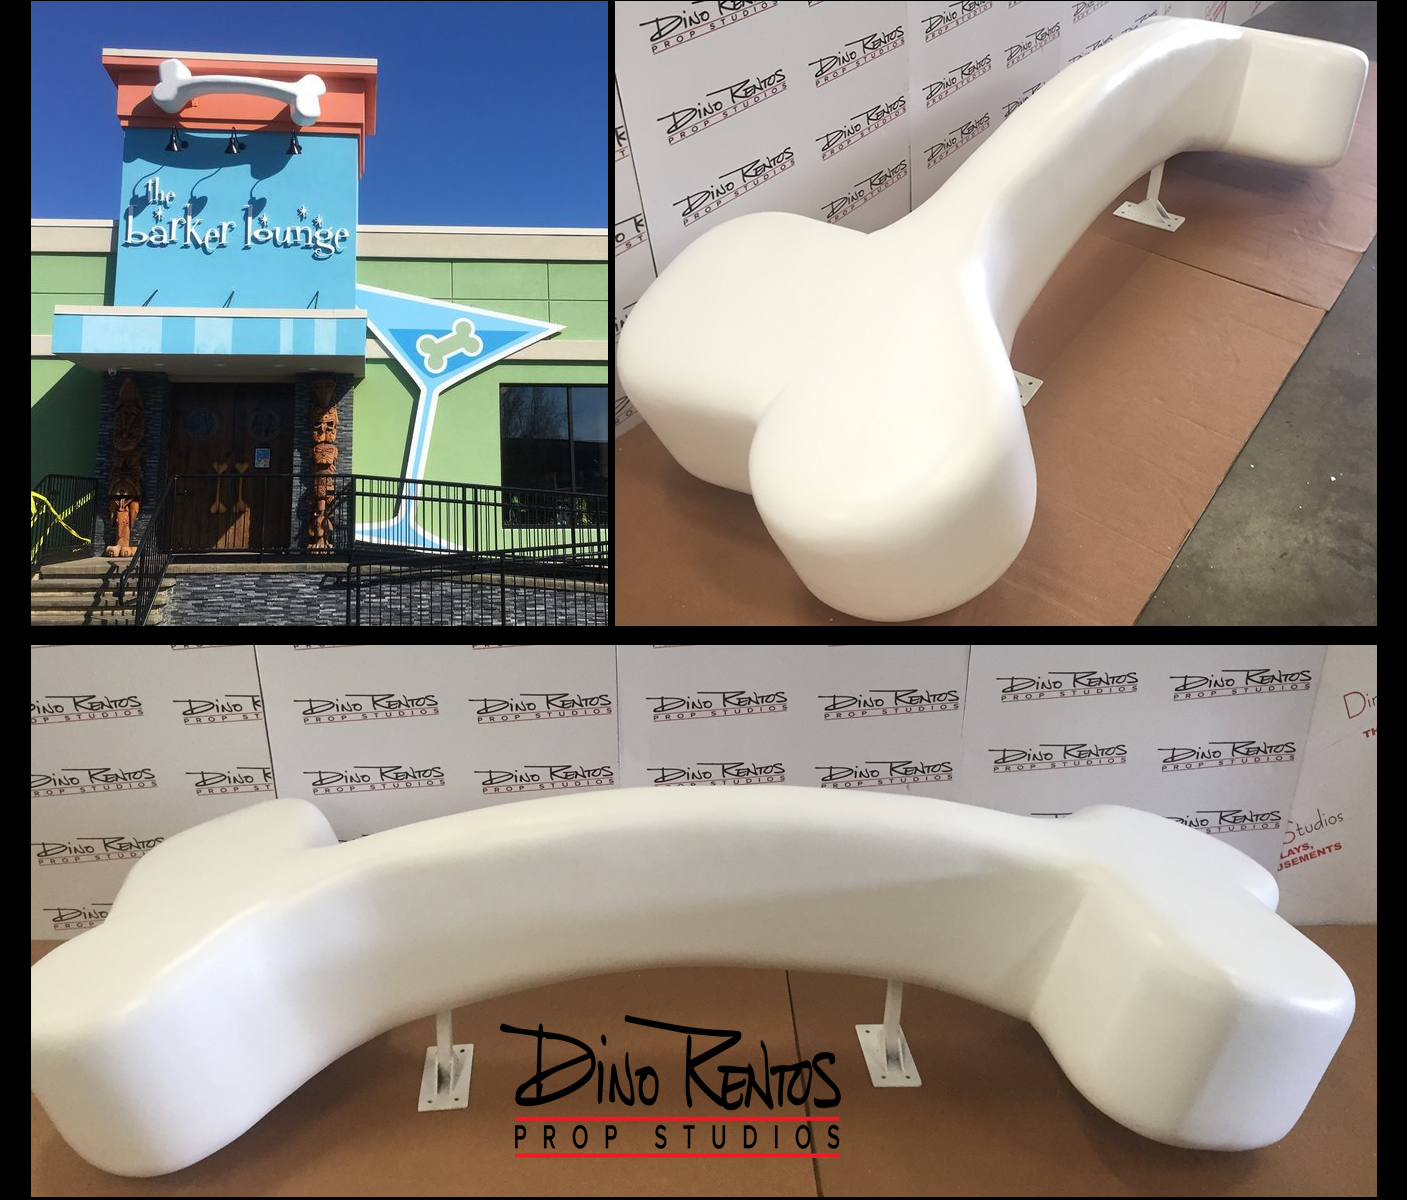 Large scenic foam dog bone for retail display at dog groomers